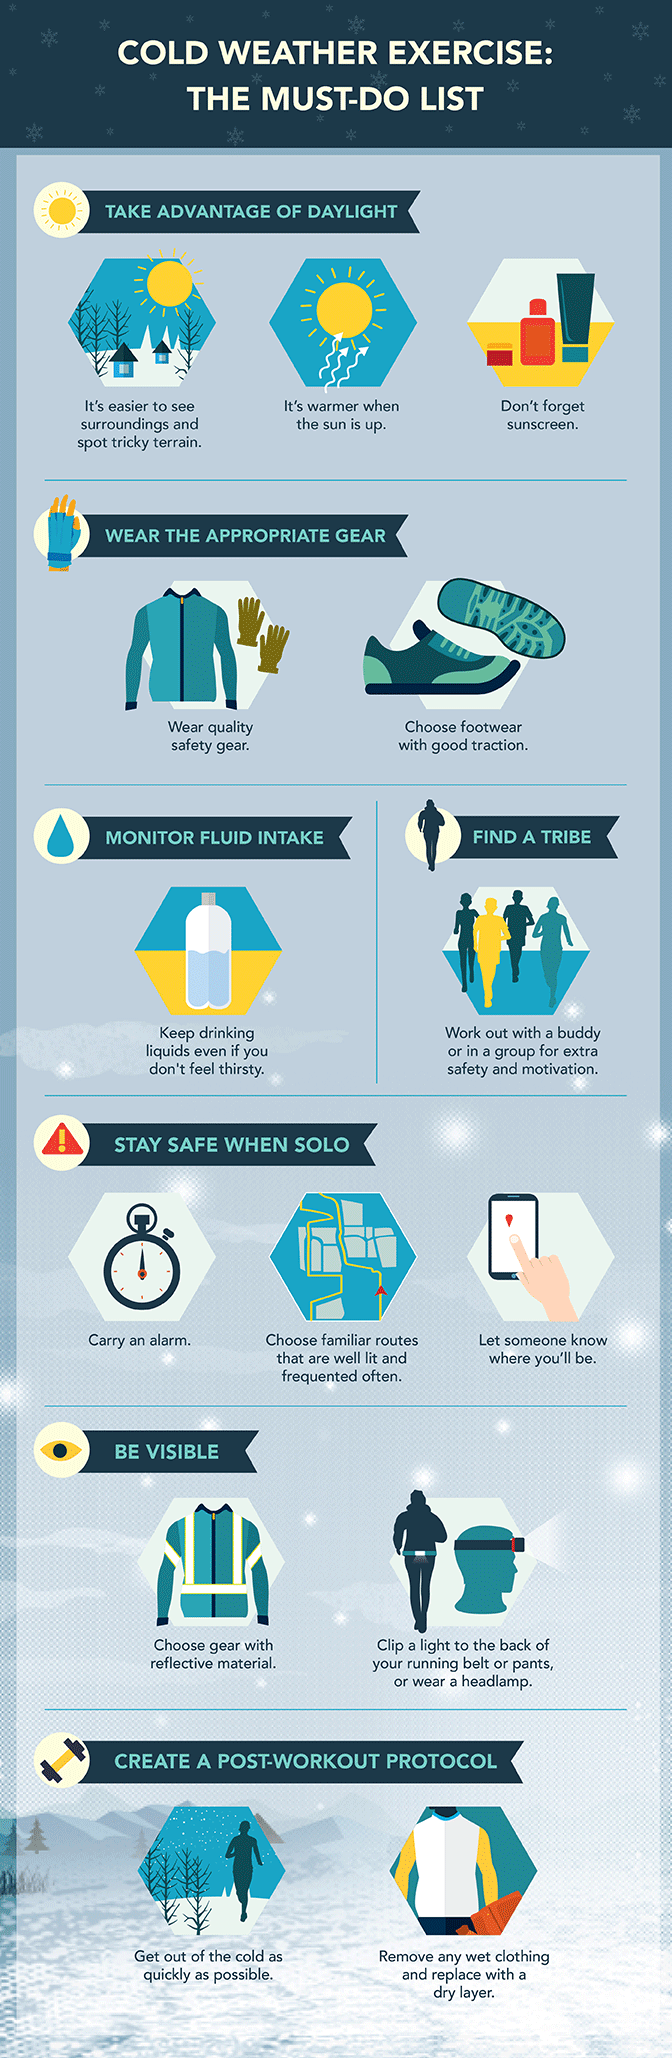 Cold Weather Exercise - The Must-Do List